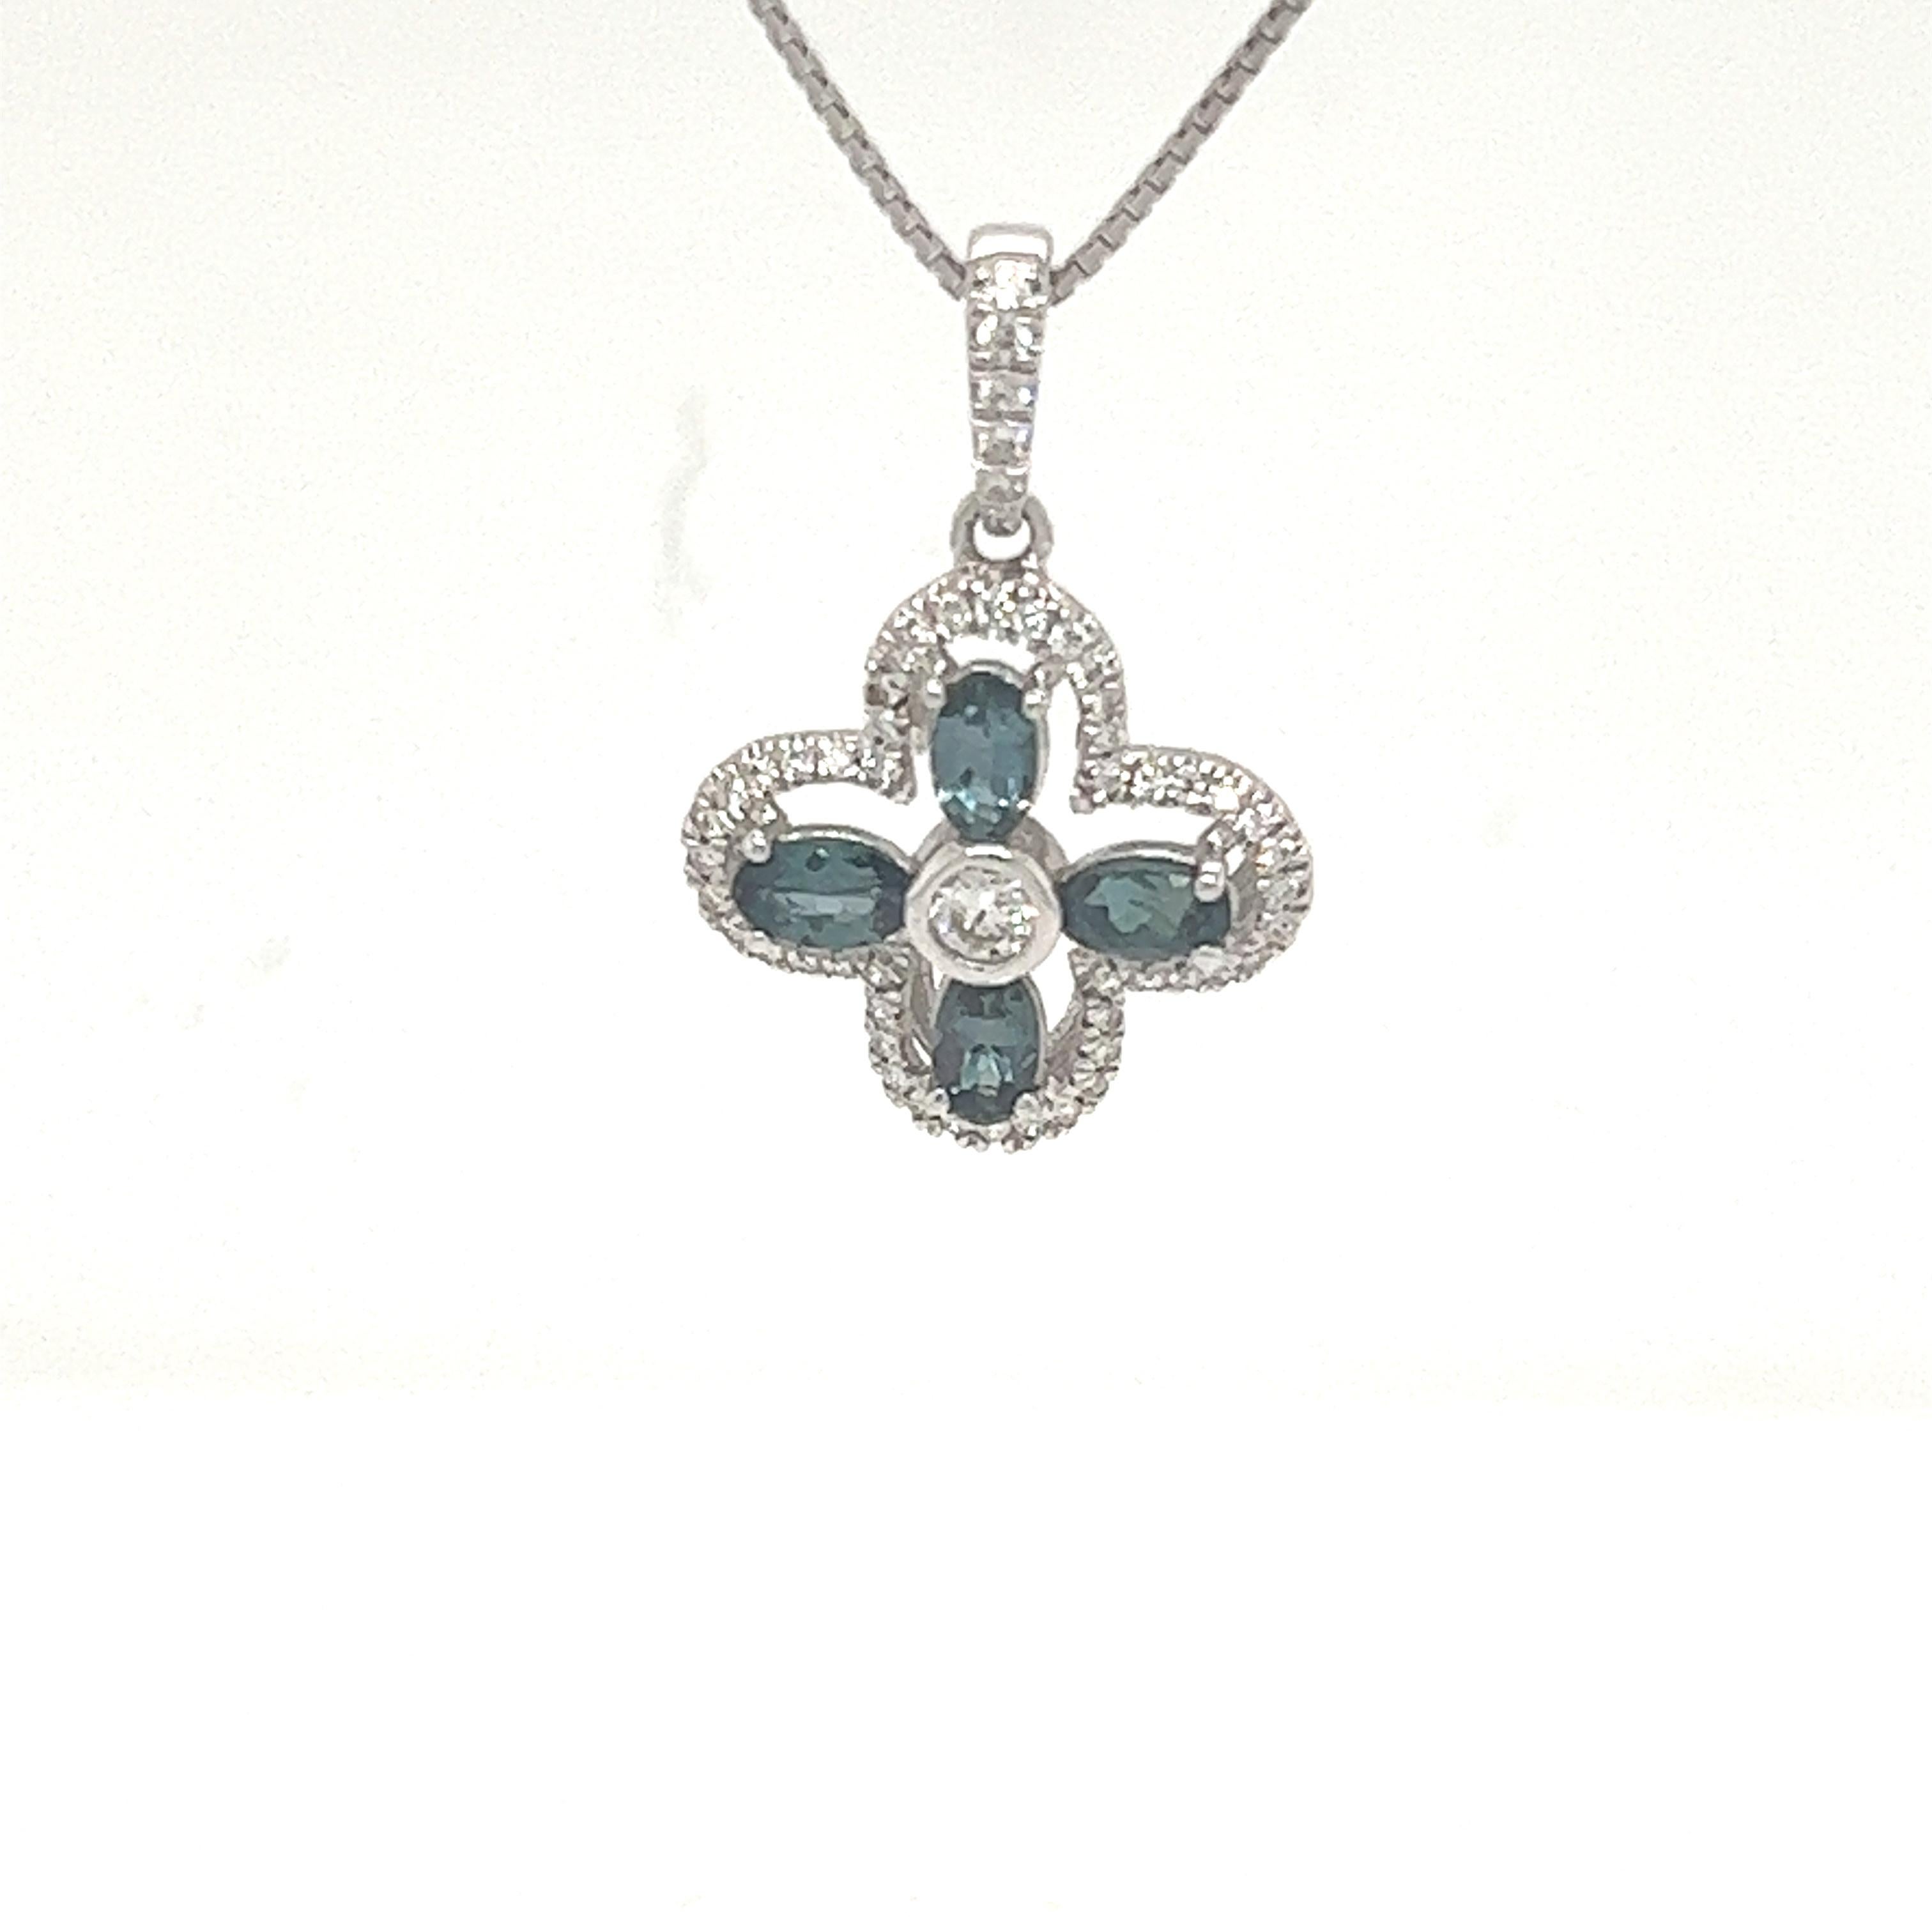 This is an exceptional natural oval-shaped alexandrite and diamond pendant set in platinum. The fancy 9x6MM Alexandrite has an excellent green color and is surrounded by a halo of round-cut white diamonds. The pendant is a true showstopper. 
Please